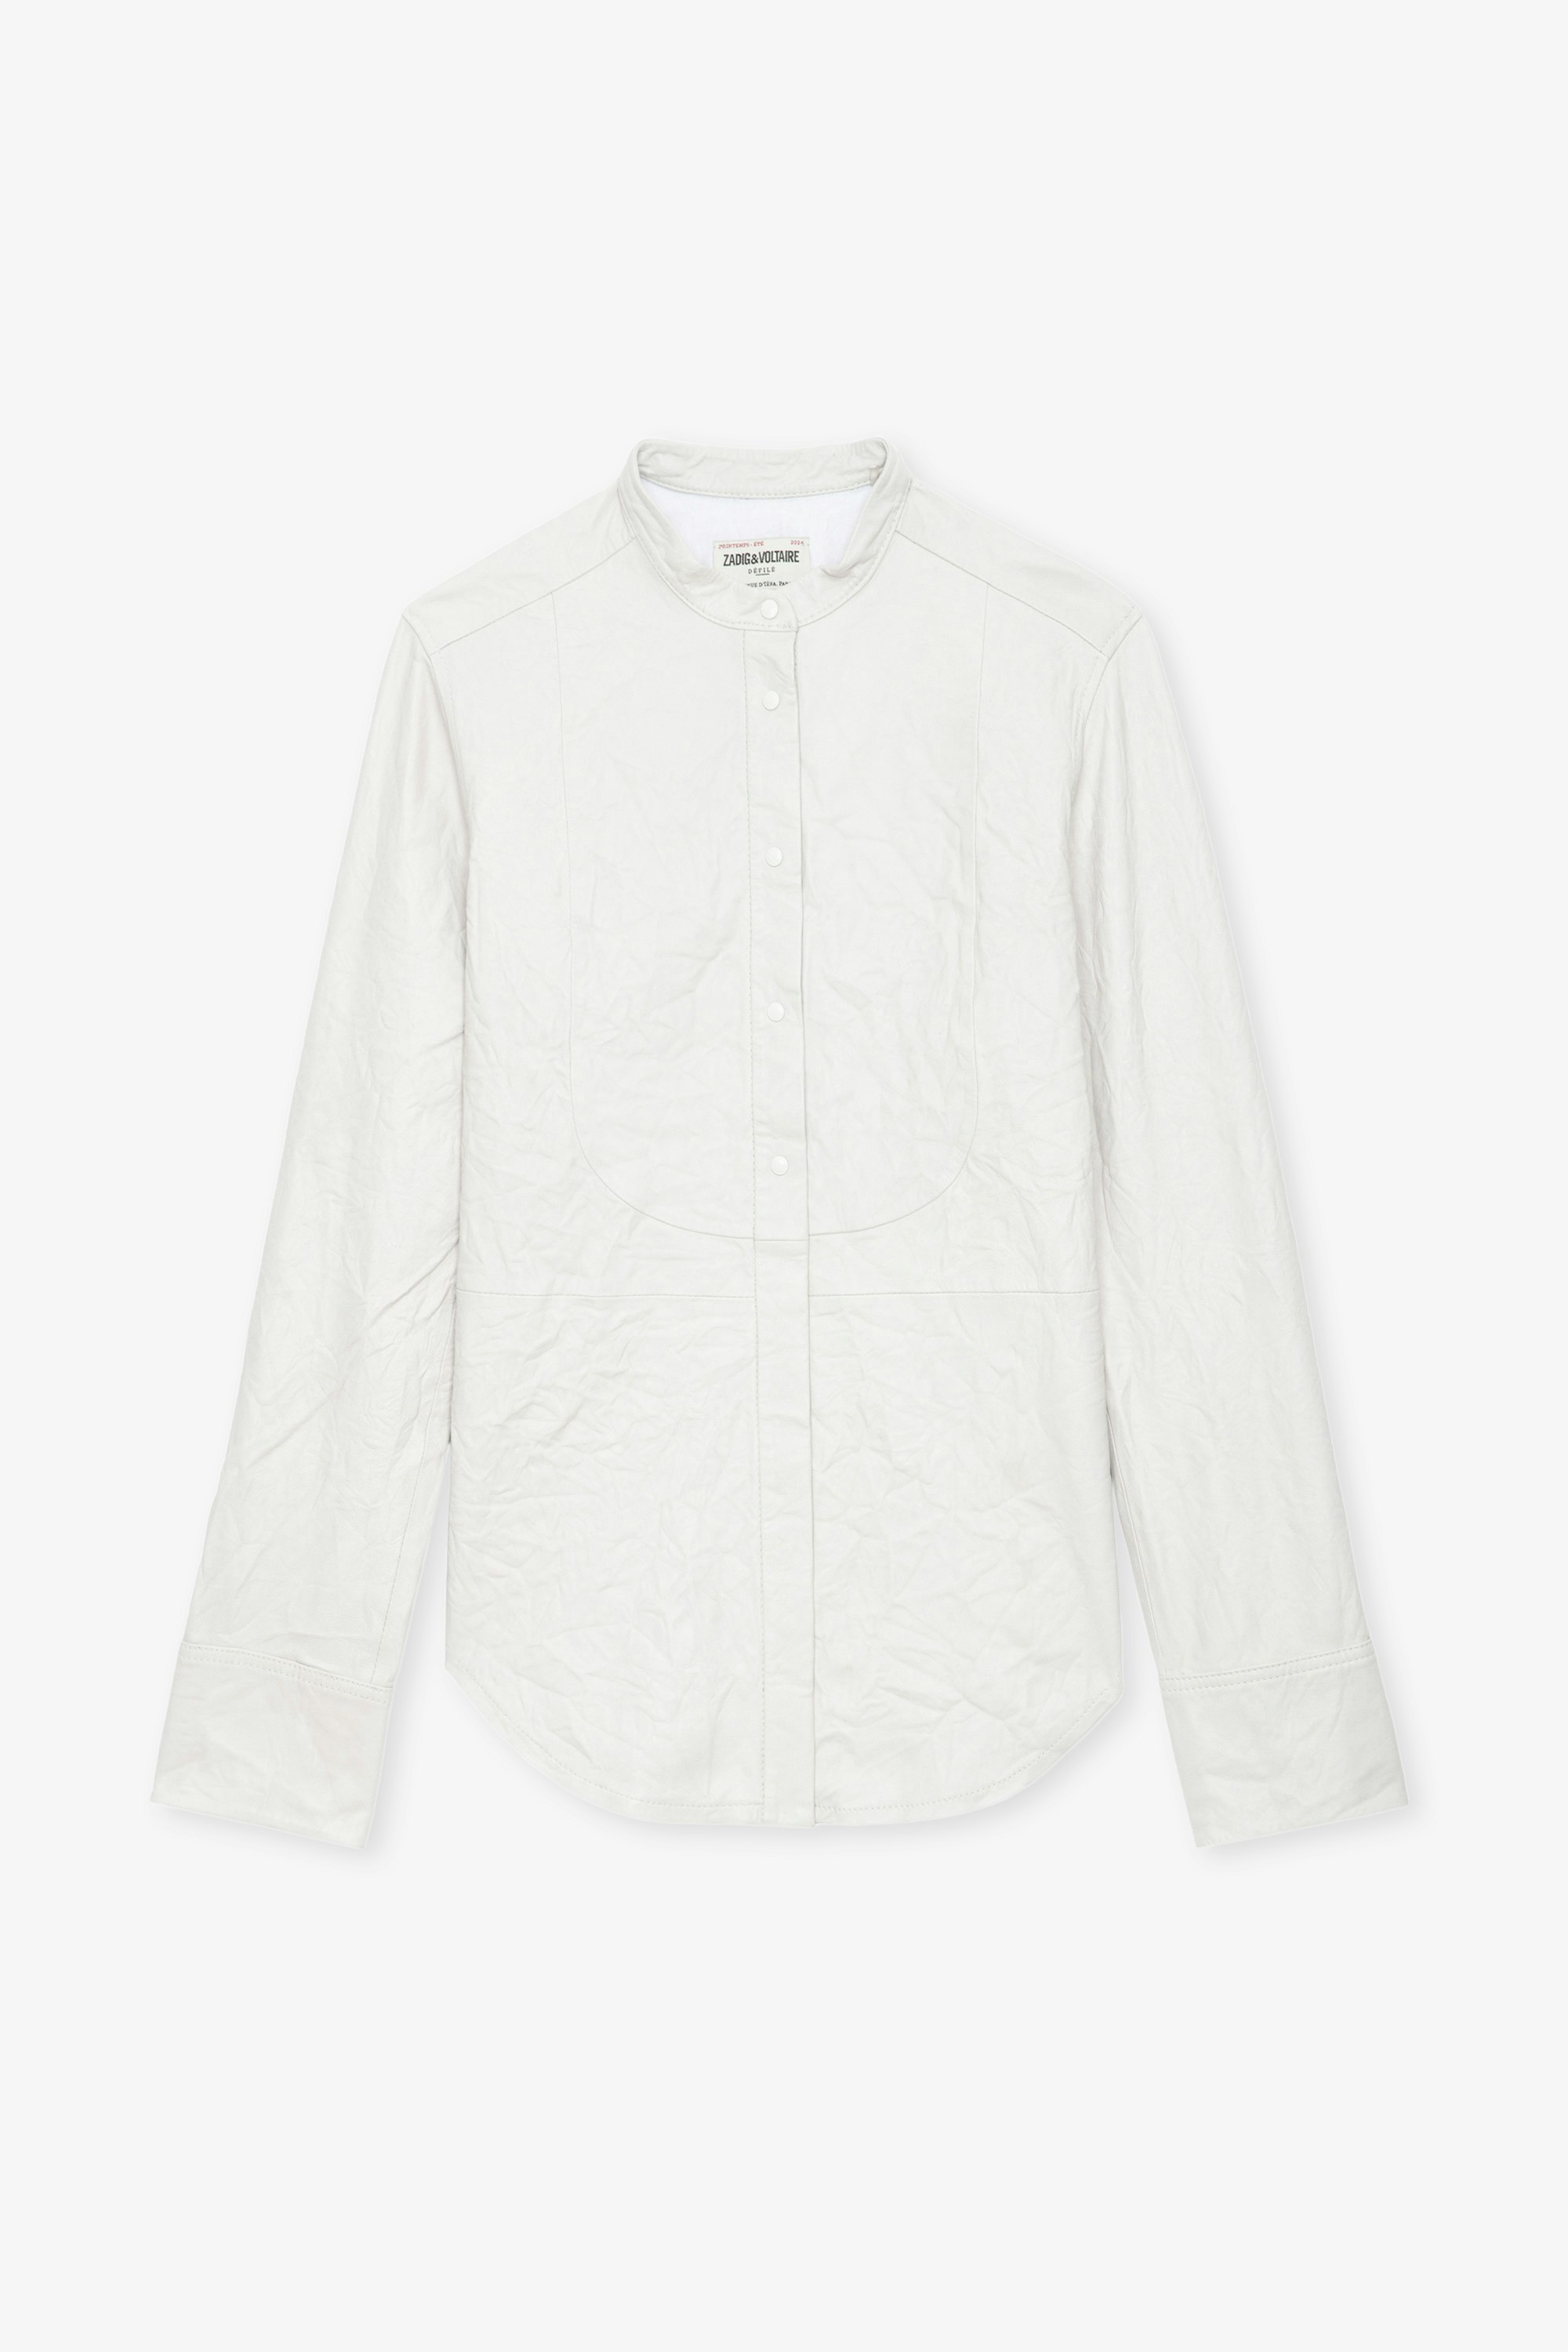 Chic Crinkled Leather Shirt - White crinkled leather shirt with press studs.